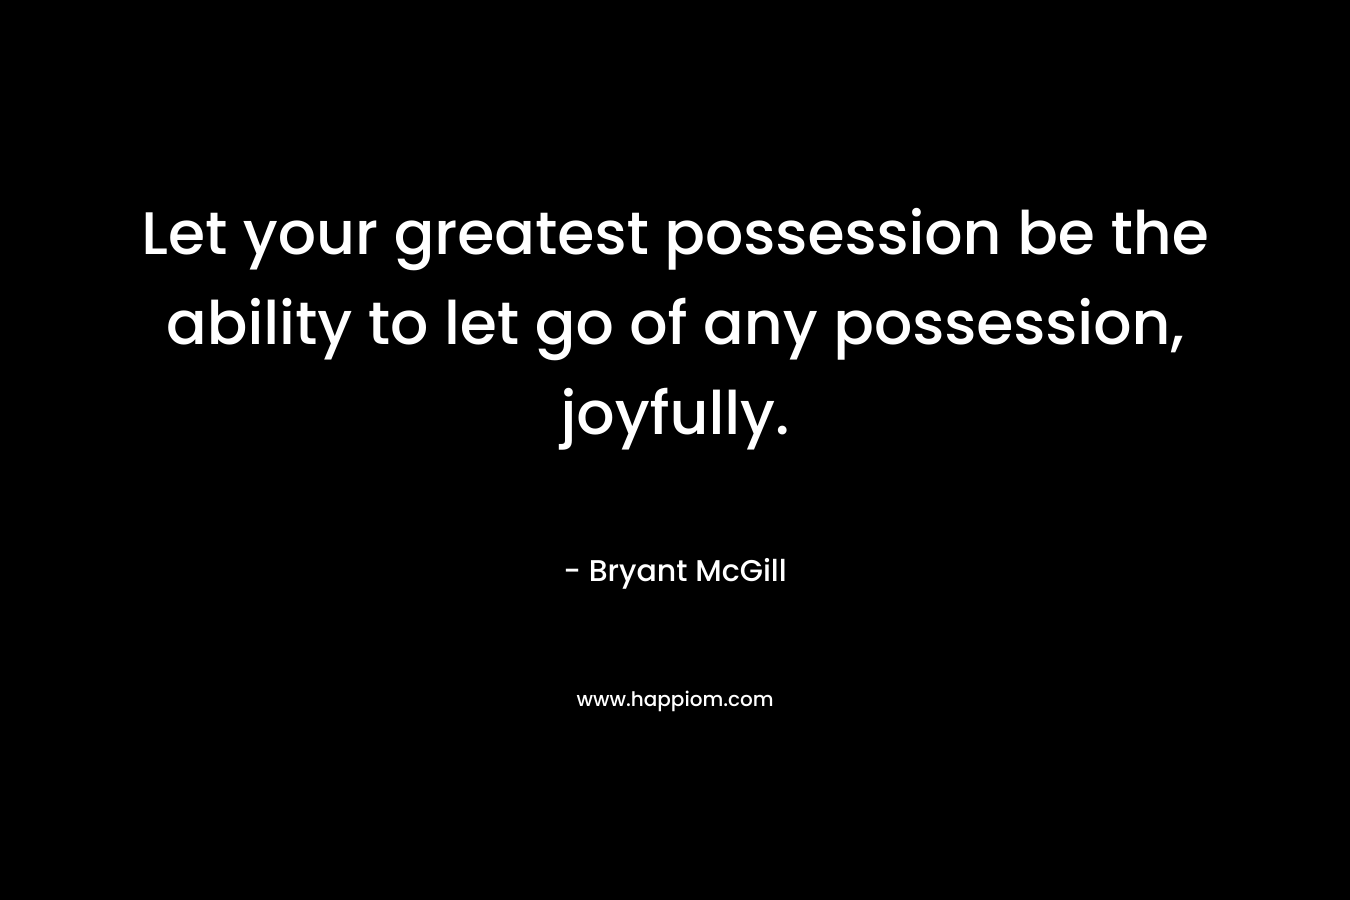 Let your greatest possession be the ability to let go of any possession, joyfully.